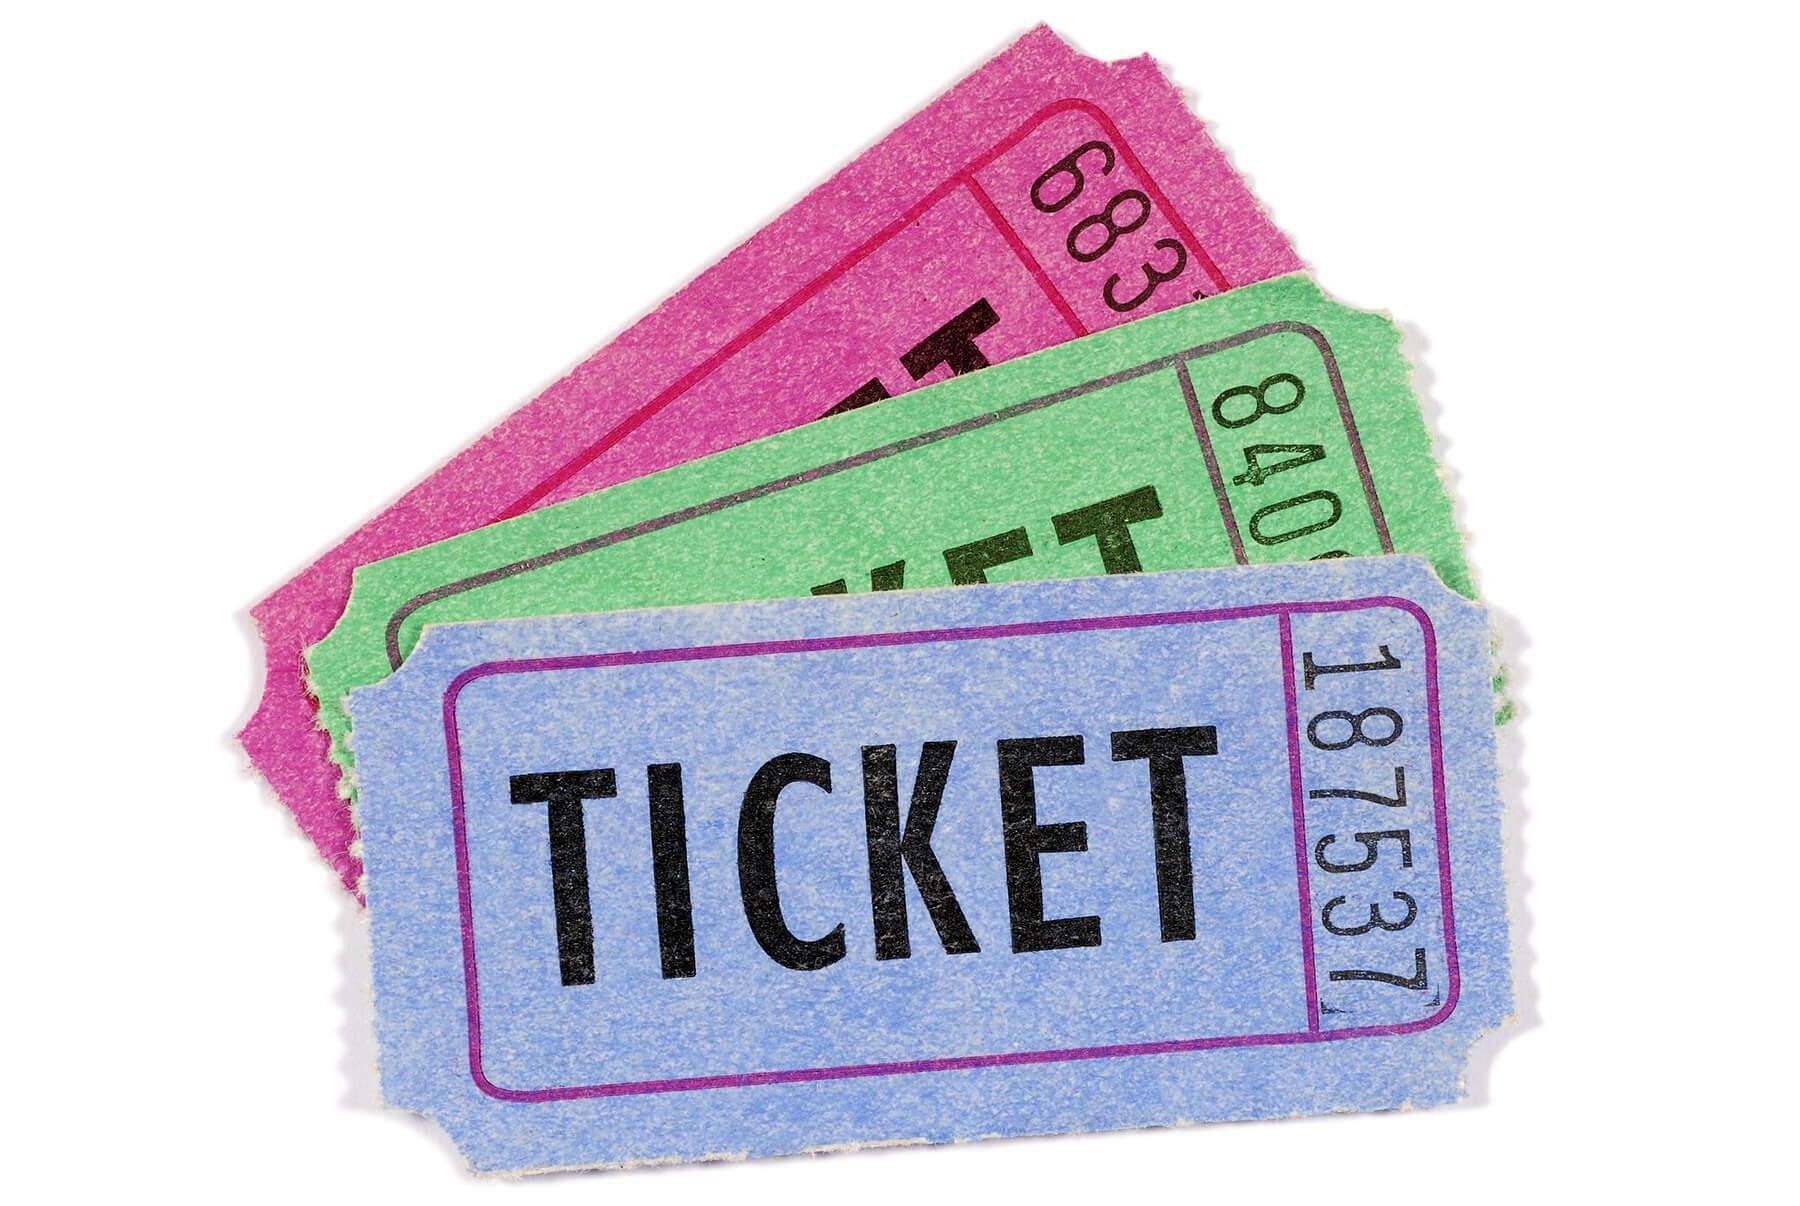 PURCHASE YOUR RAFFLE TICKETS HERE!